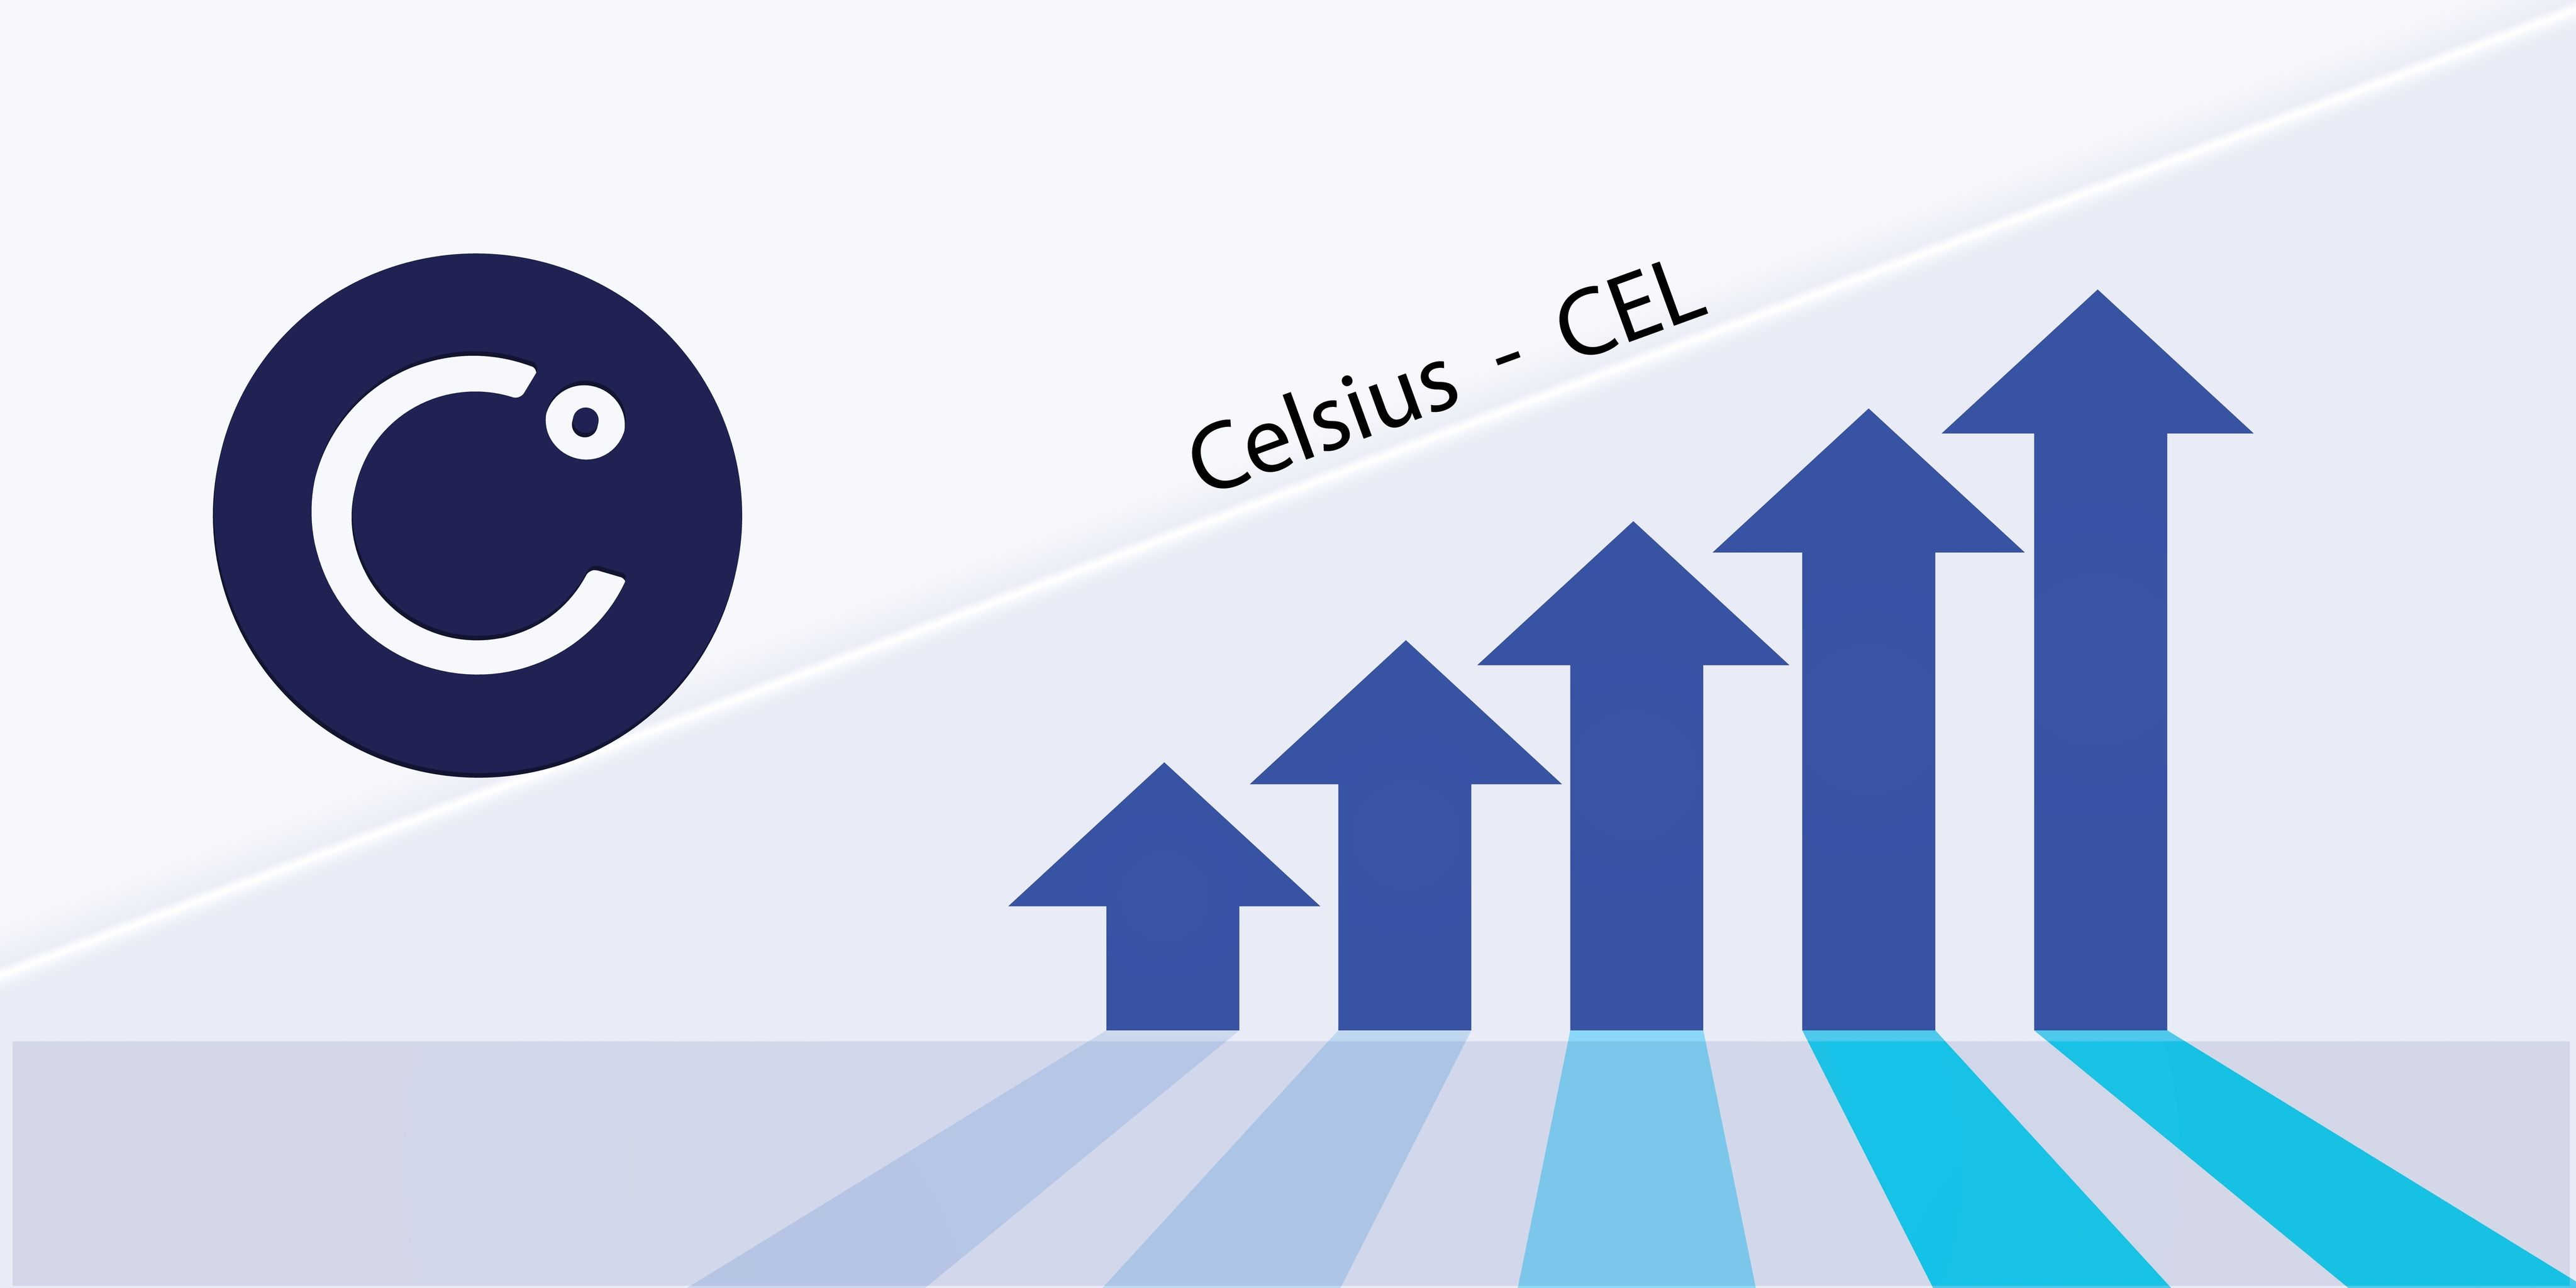 Why is Celsius up by more than 11% in the last 24 hours?